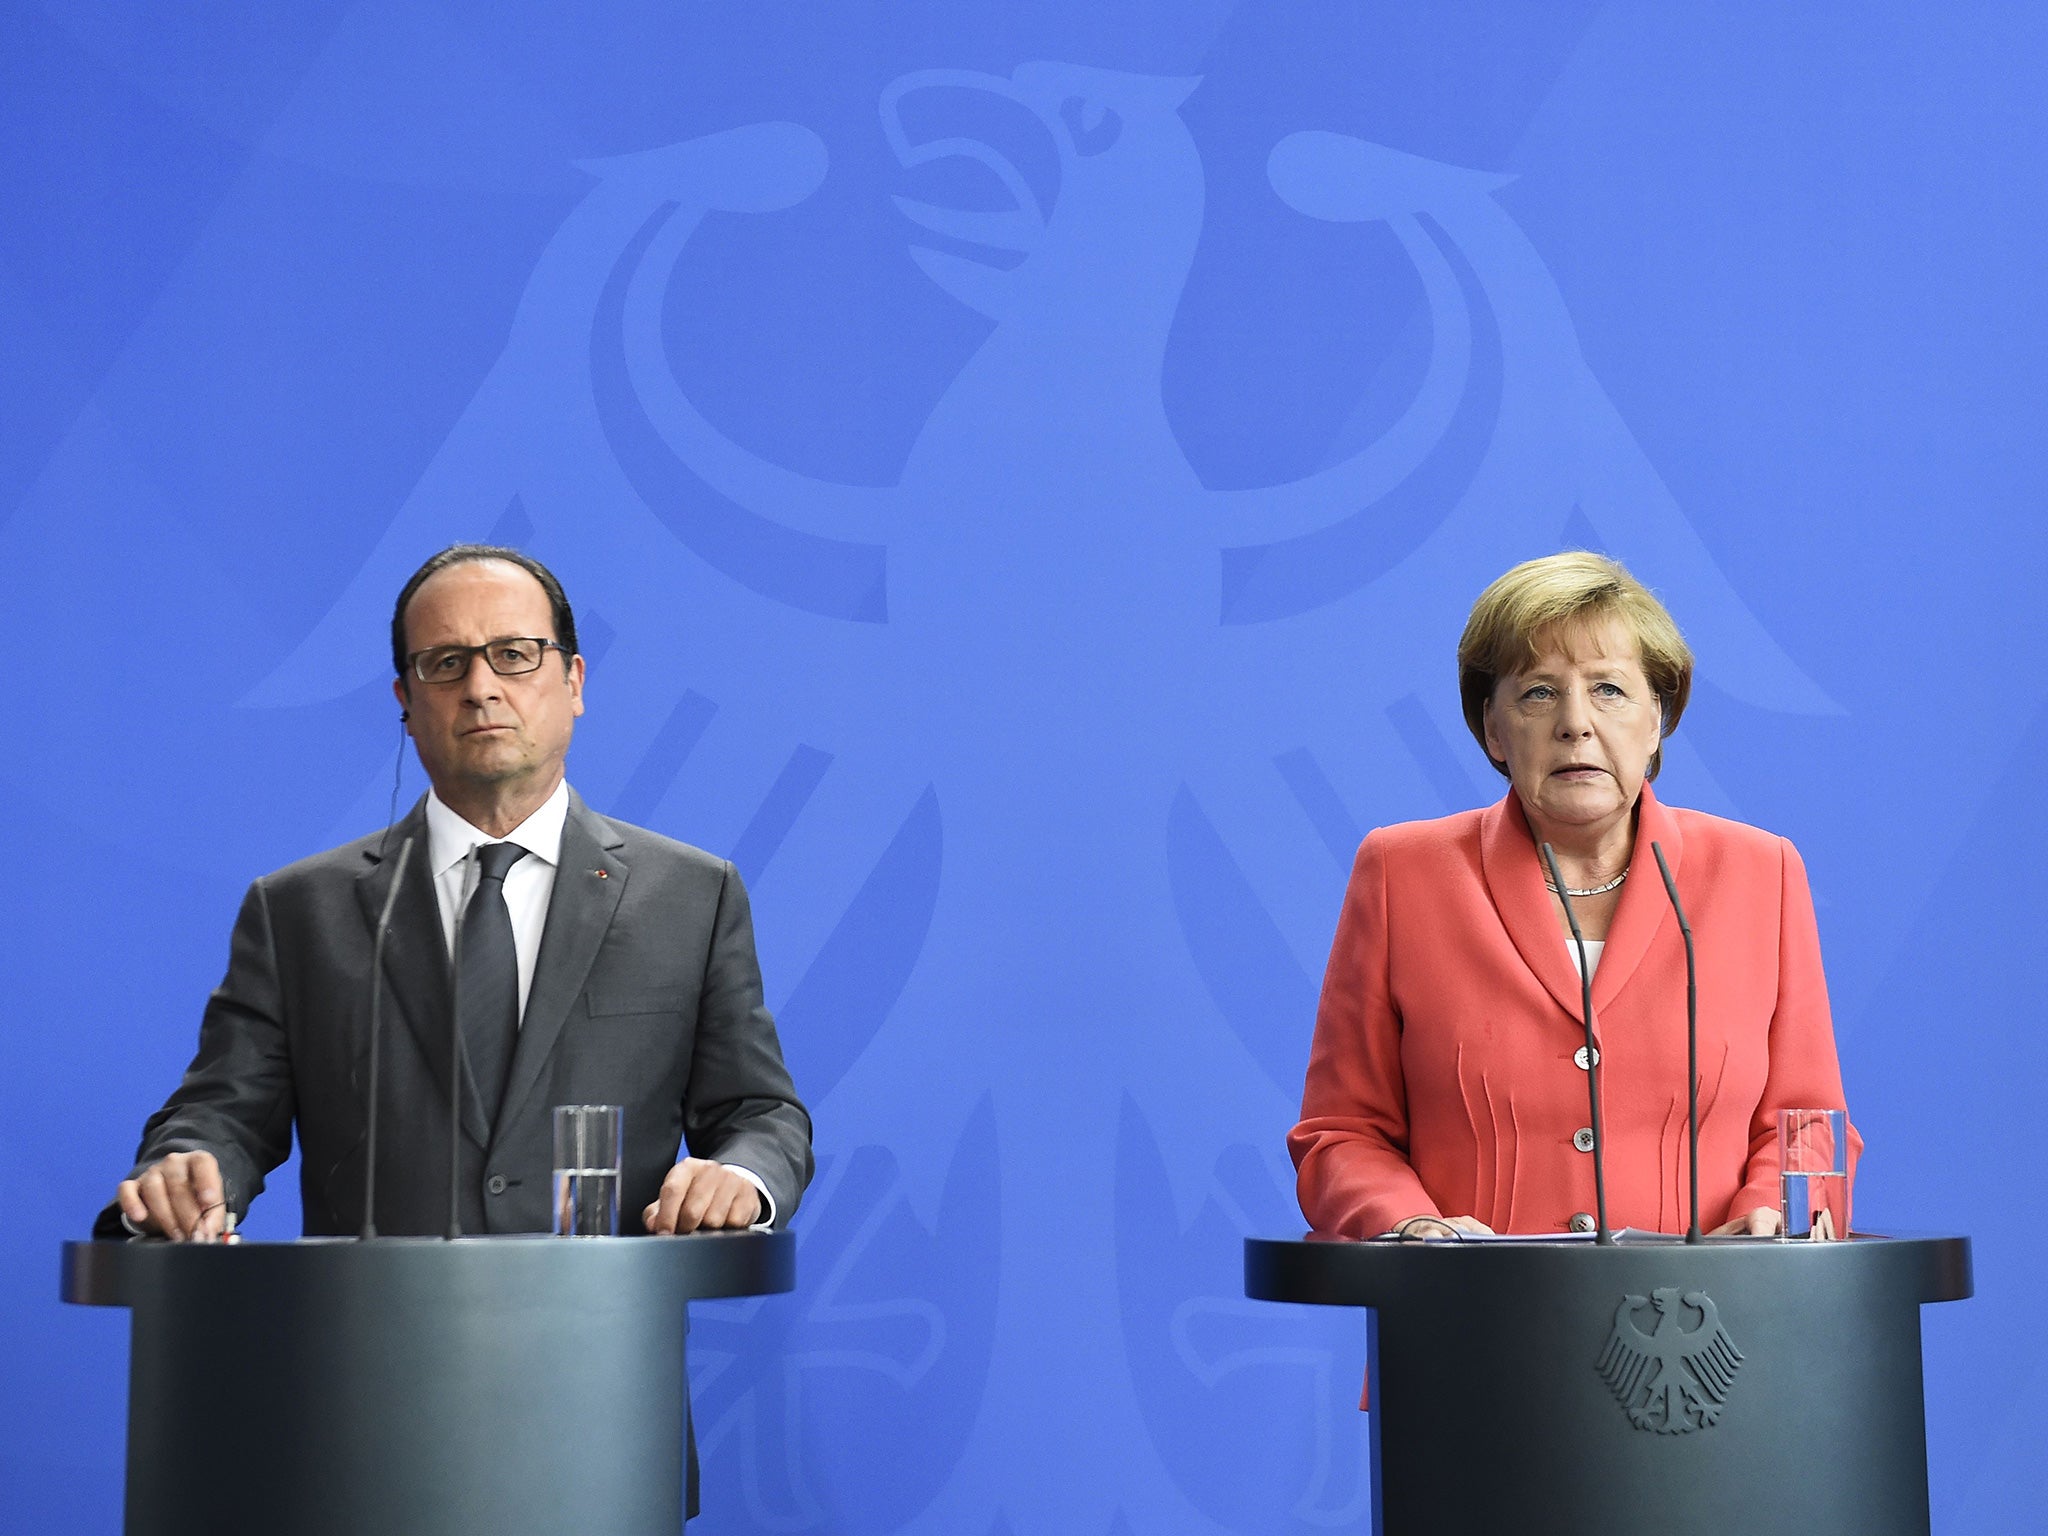 German Chancellor Angela Merkel and French President François Hollande after their talks in Berlin